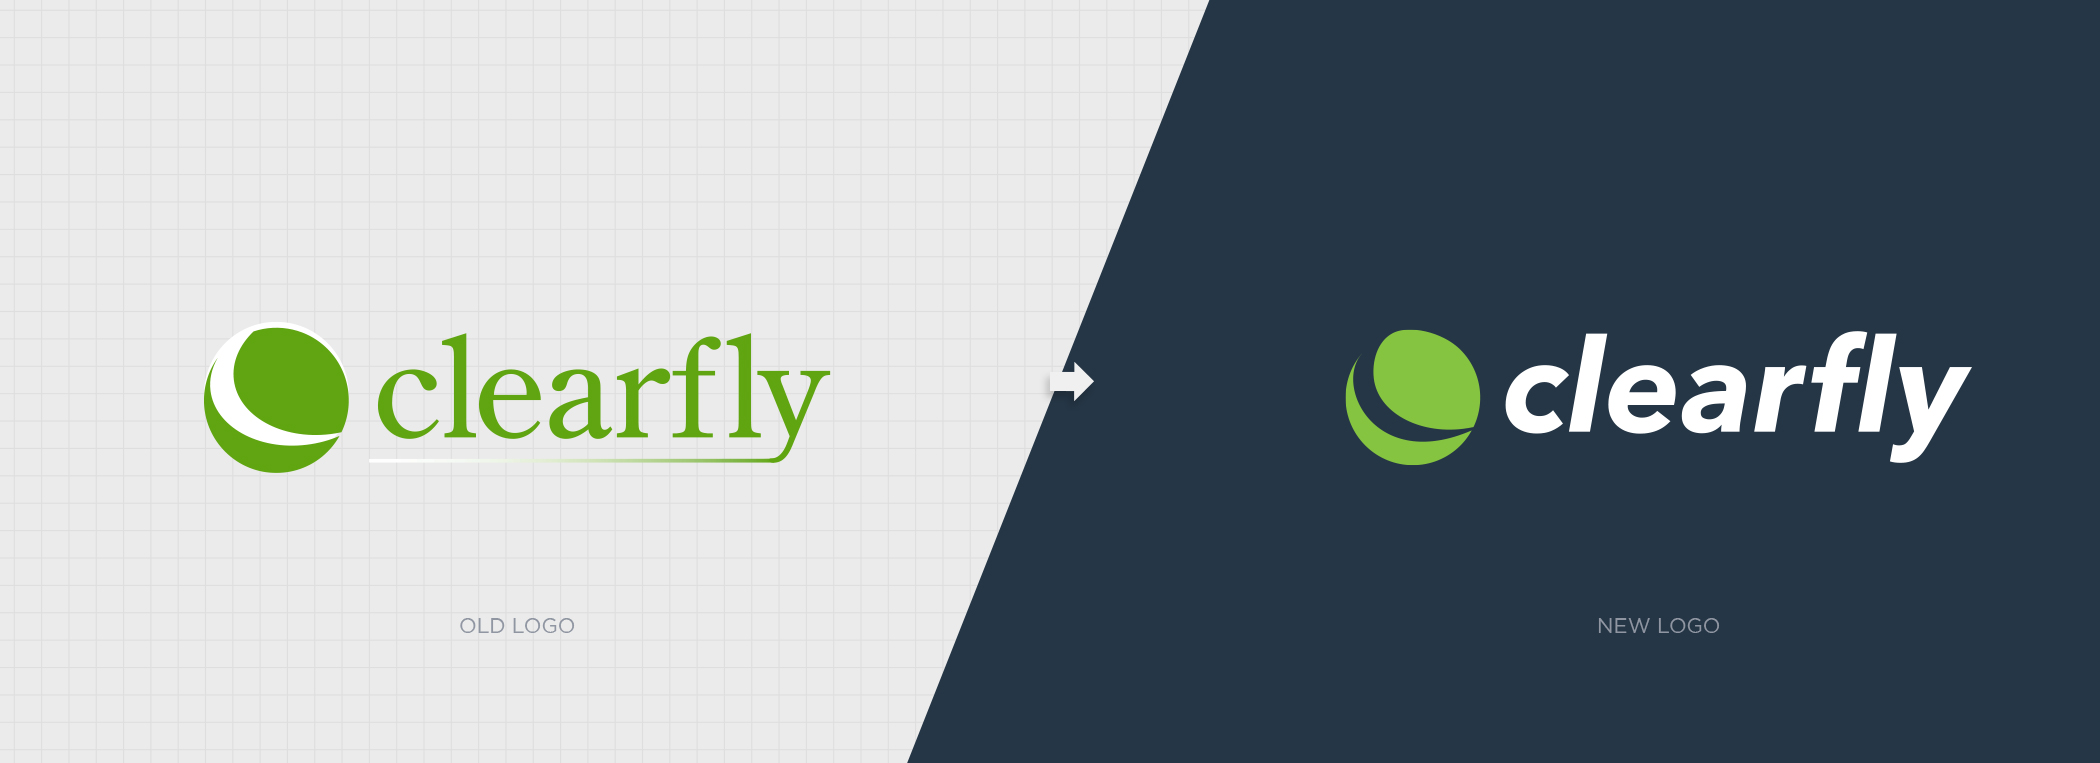 Clearfly Logo Redesign